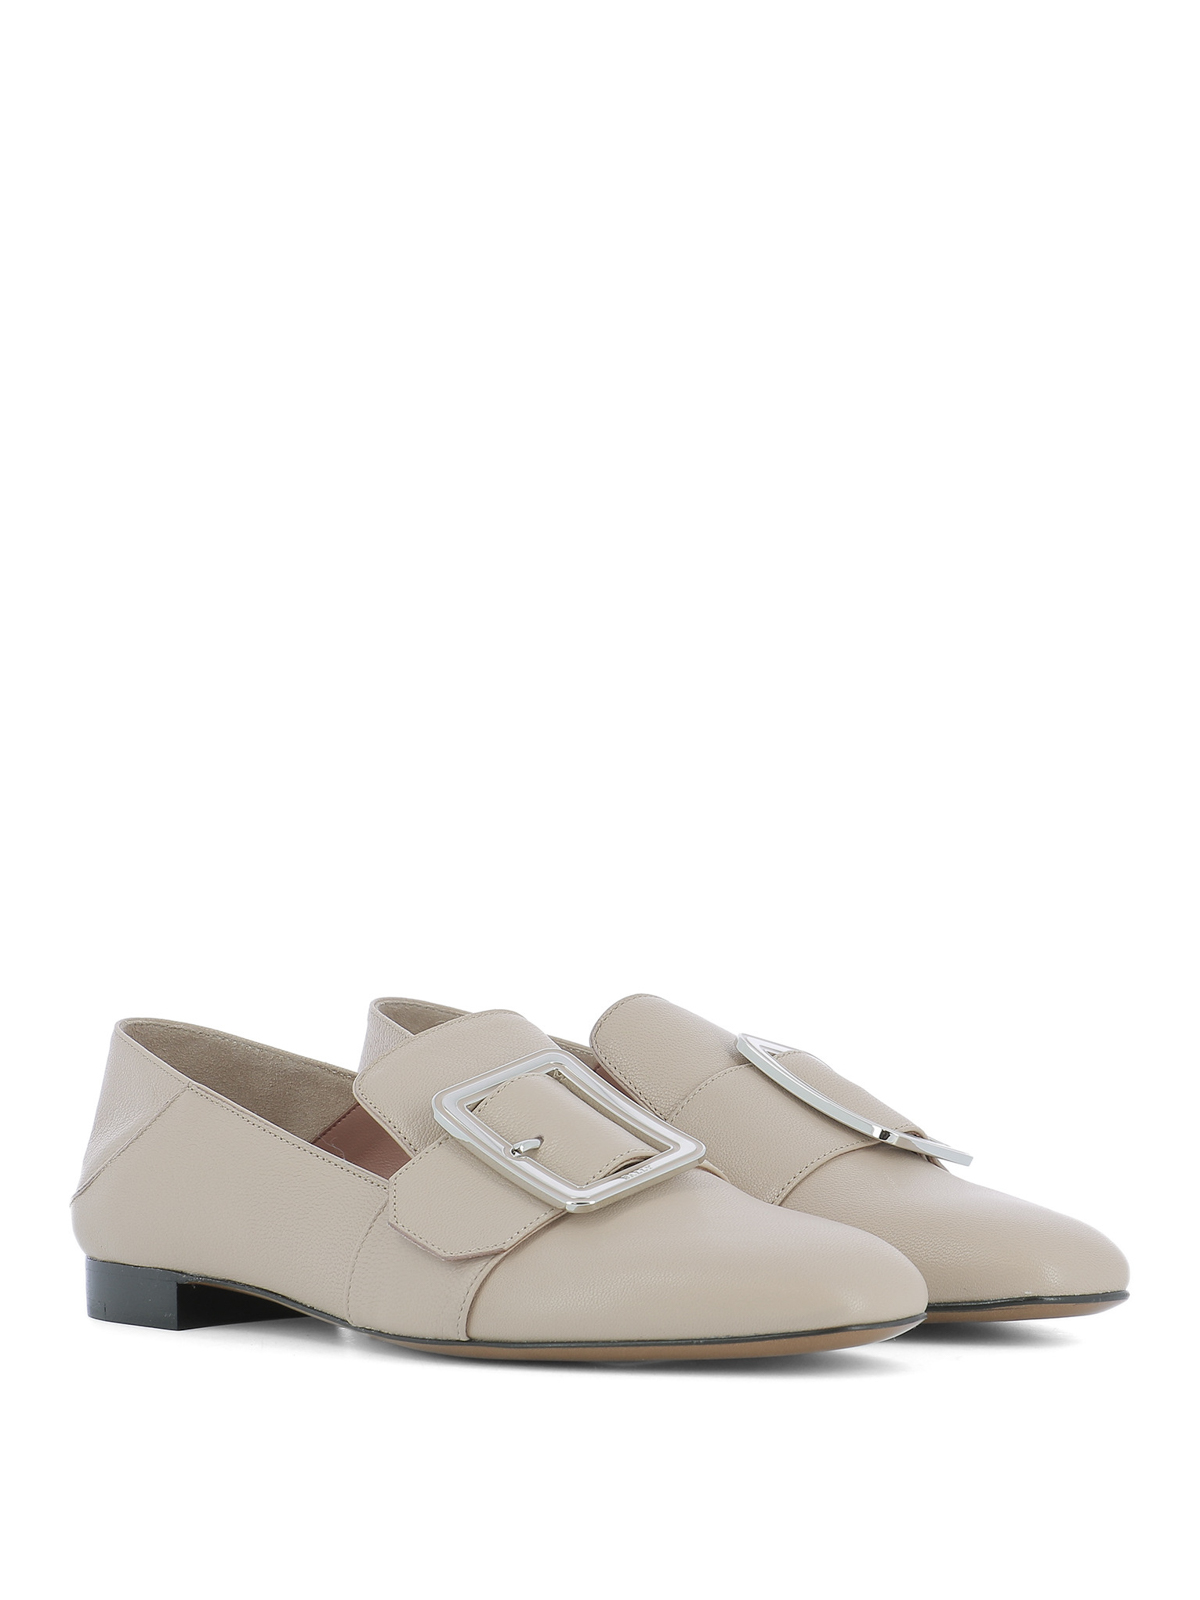 bally janelle leather slippers